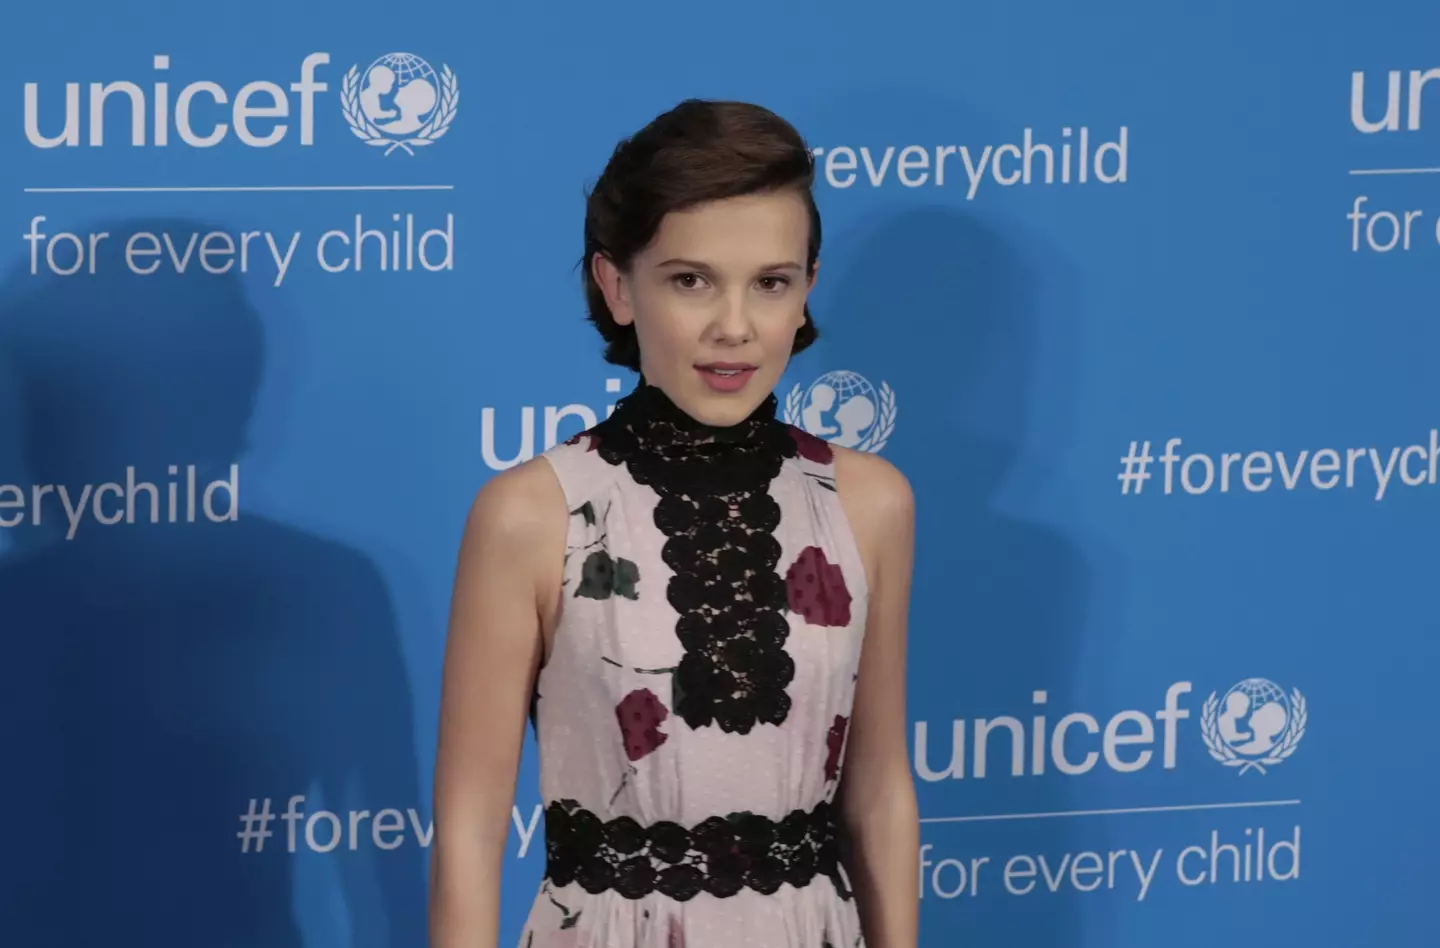 Millie Bobby Brown Participated at UNICEF's 70th Anniversary Celebrations at the United Nations Headquarters in New York.